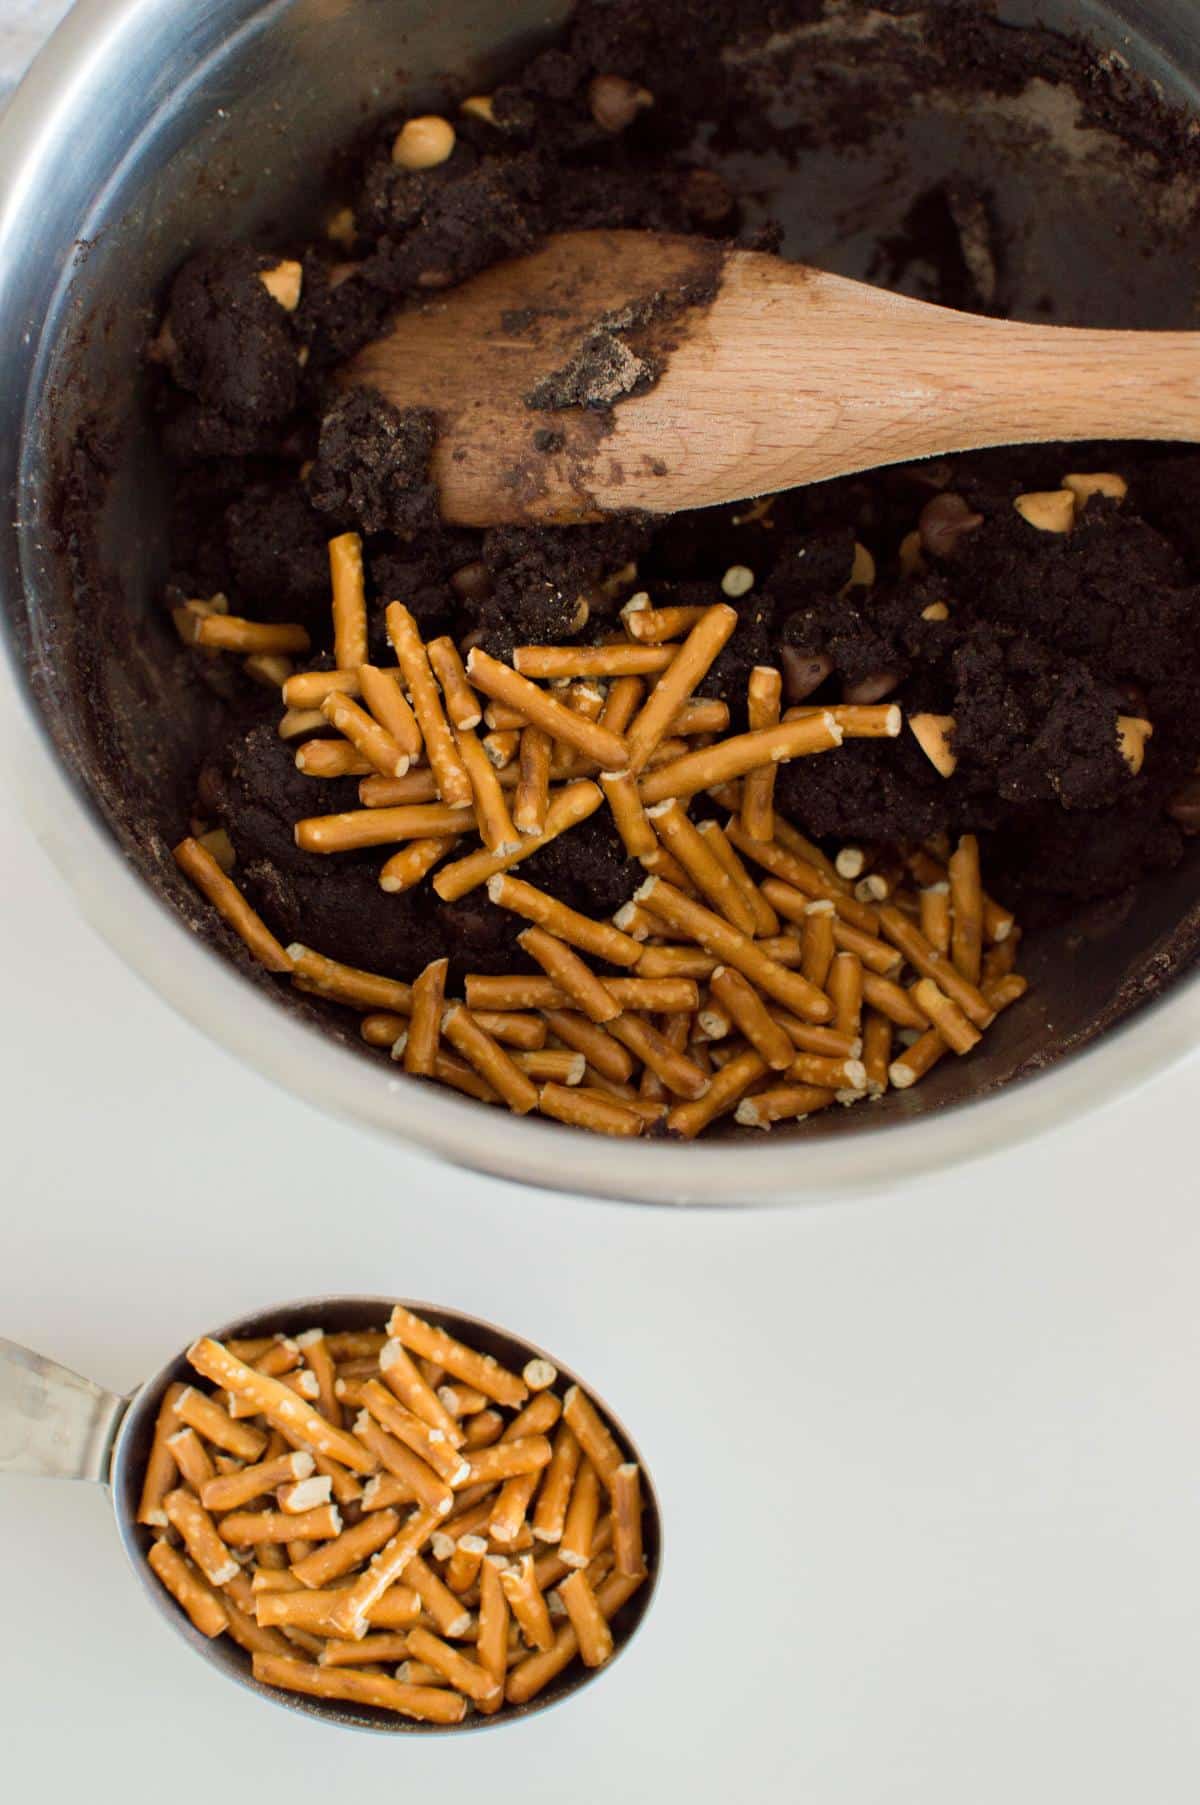 Pretzel sticks, caramel chips and chocolate chips are mixed in the batter using wooden spatula.